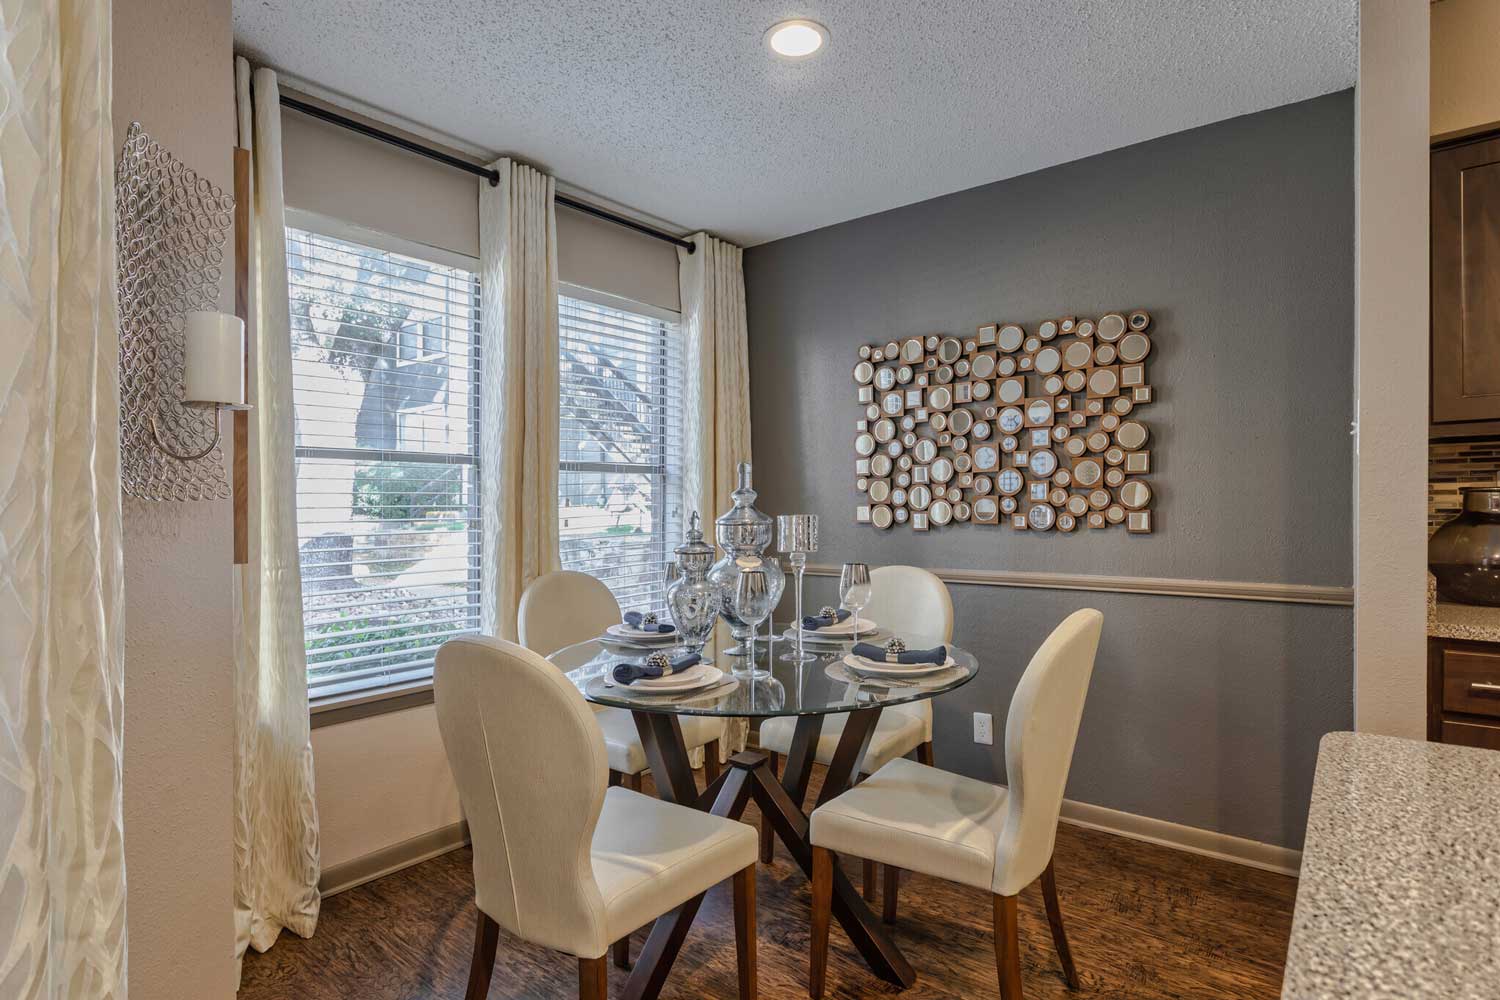 Windows in Dining Area with Natural Light at Ridgeview Place Apartments in Irving, TX